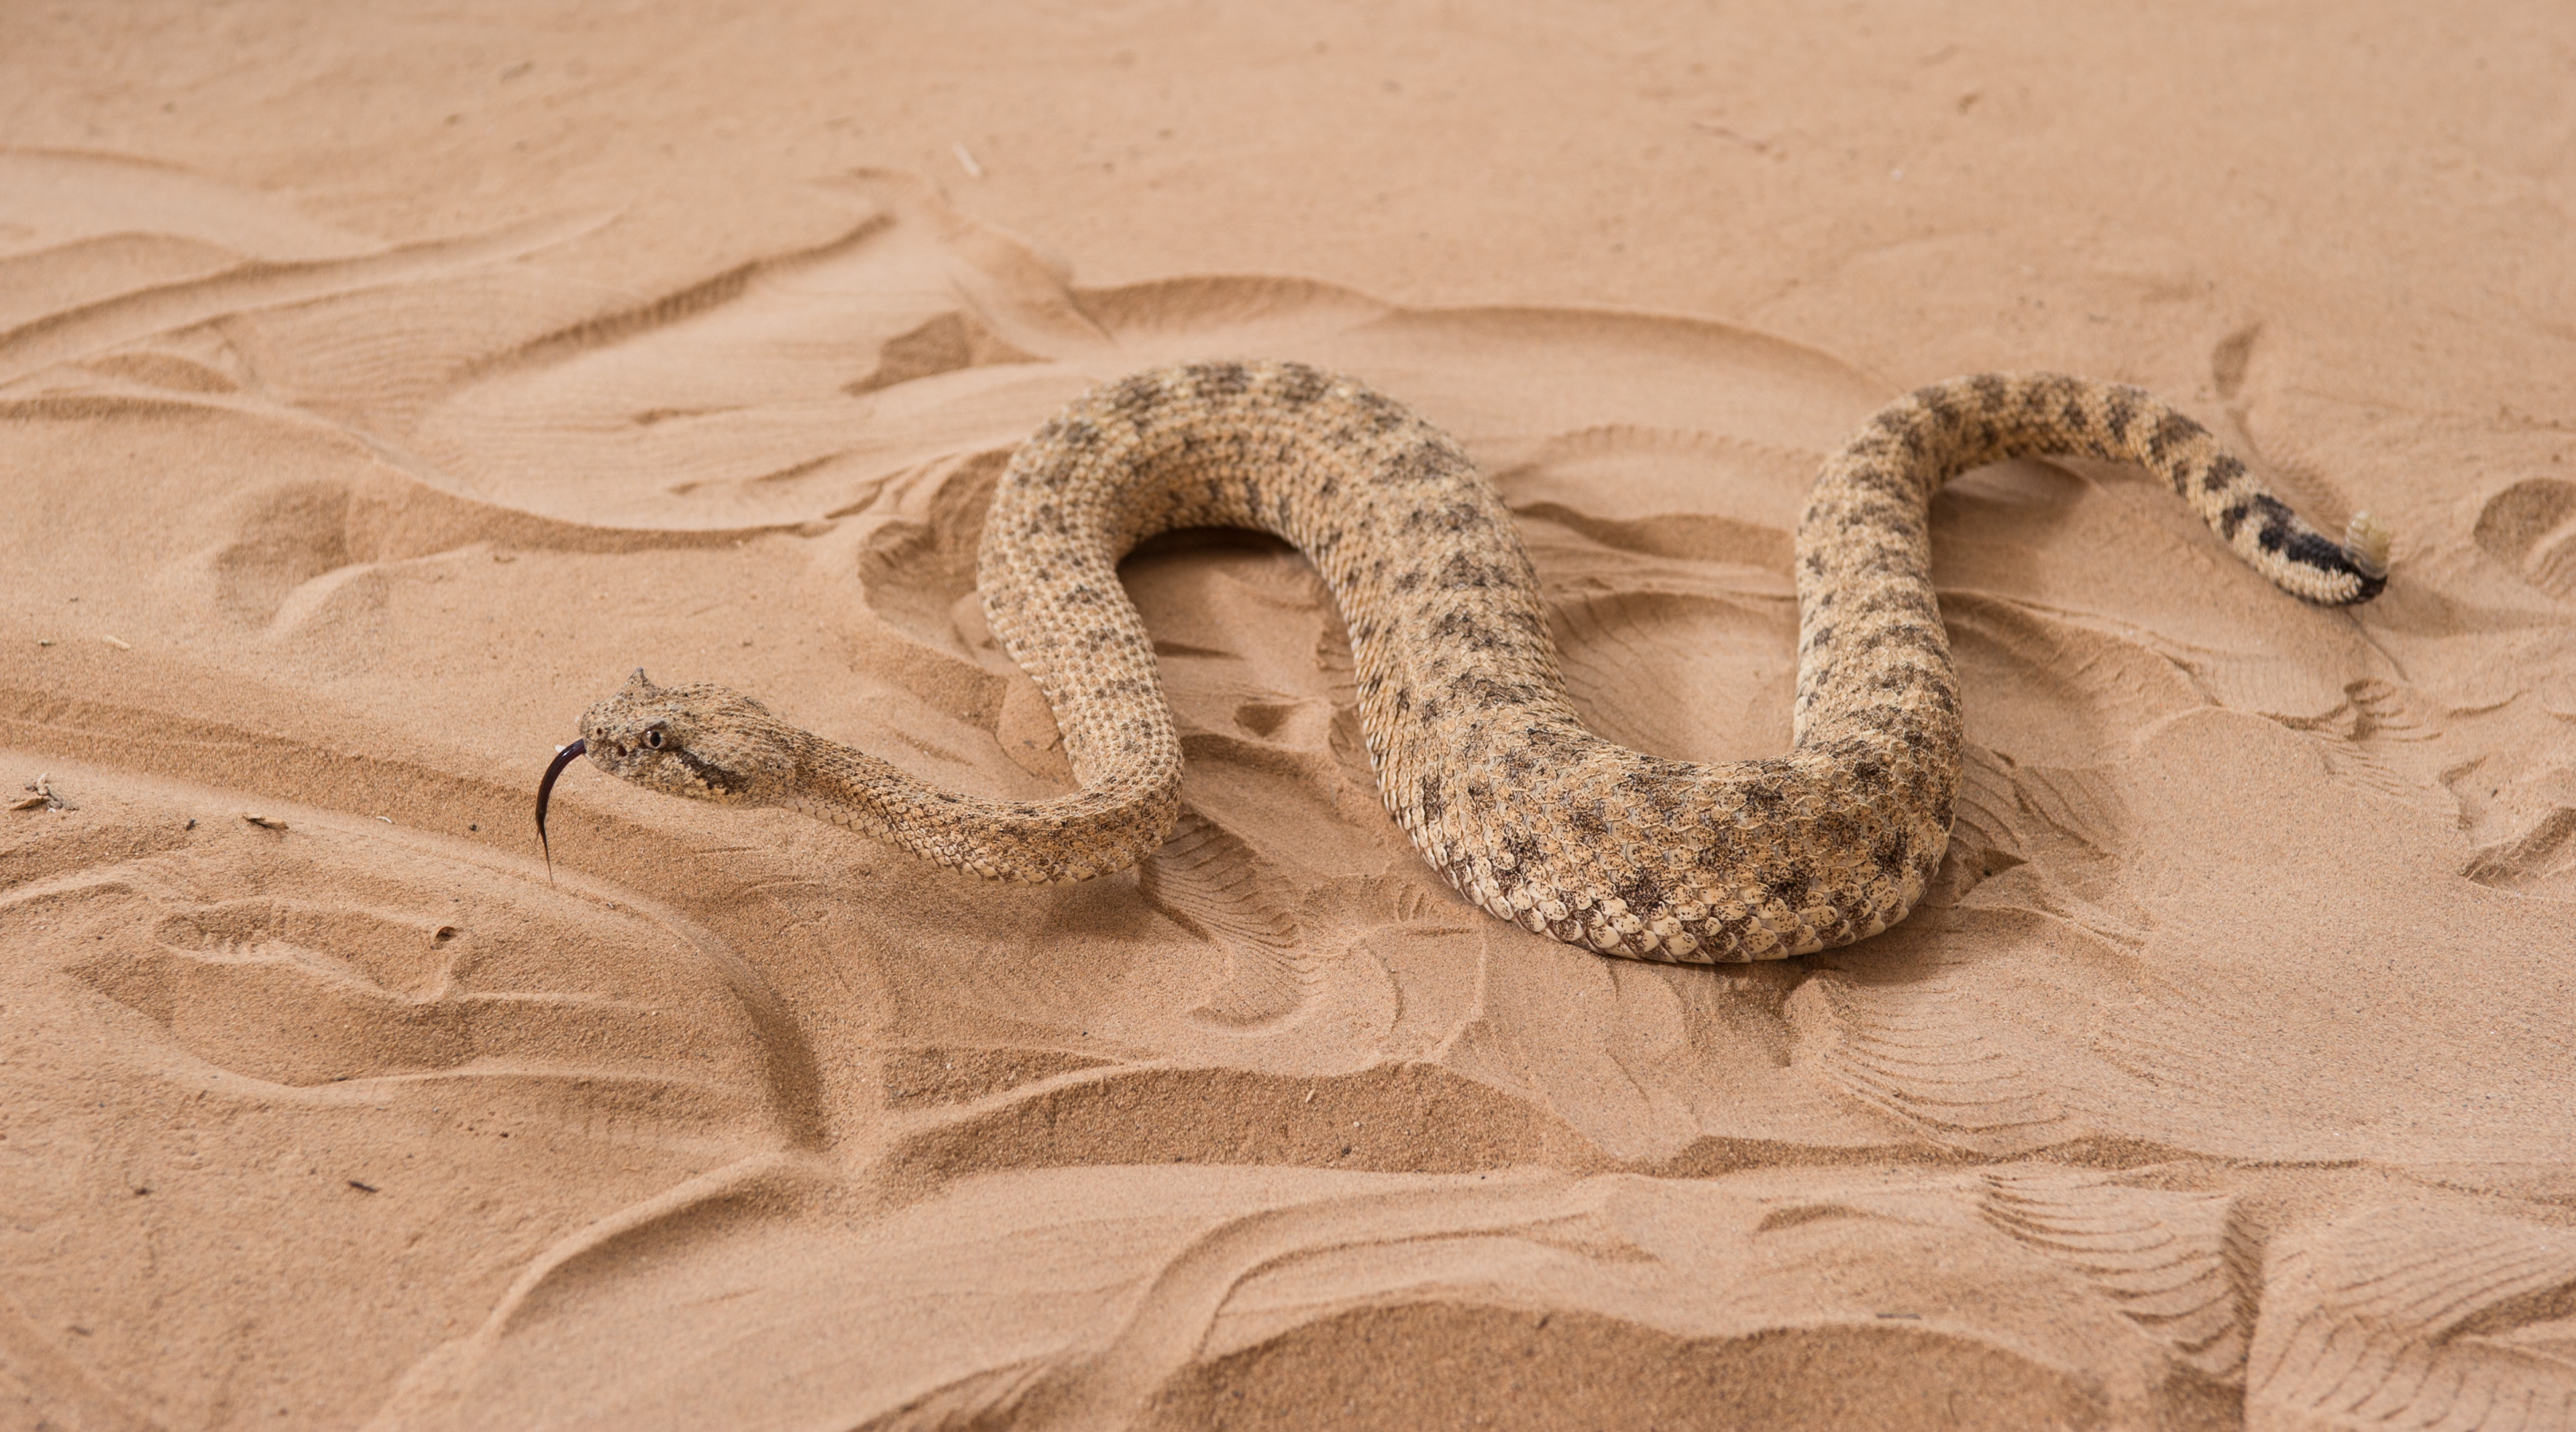 A sidewinder snake is shown in a sand-filled trackway at Zoo Atlanta. Researchers from Georgia Tech, Carnegie-Mellon University, Zoo Atlanta and Oregon State University studied the snakes to understand the unique motion they use to climb sandy slopes. (Credit: Rob Felt)